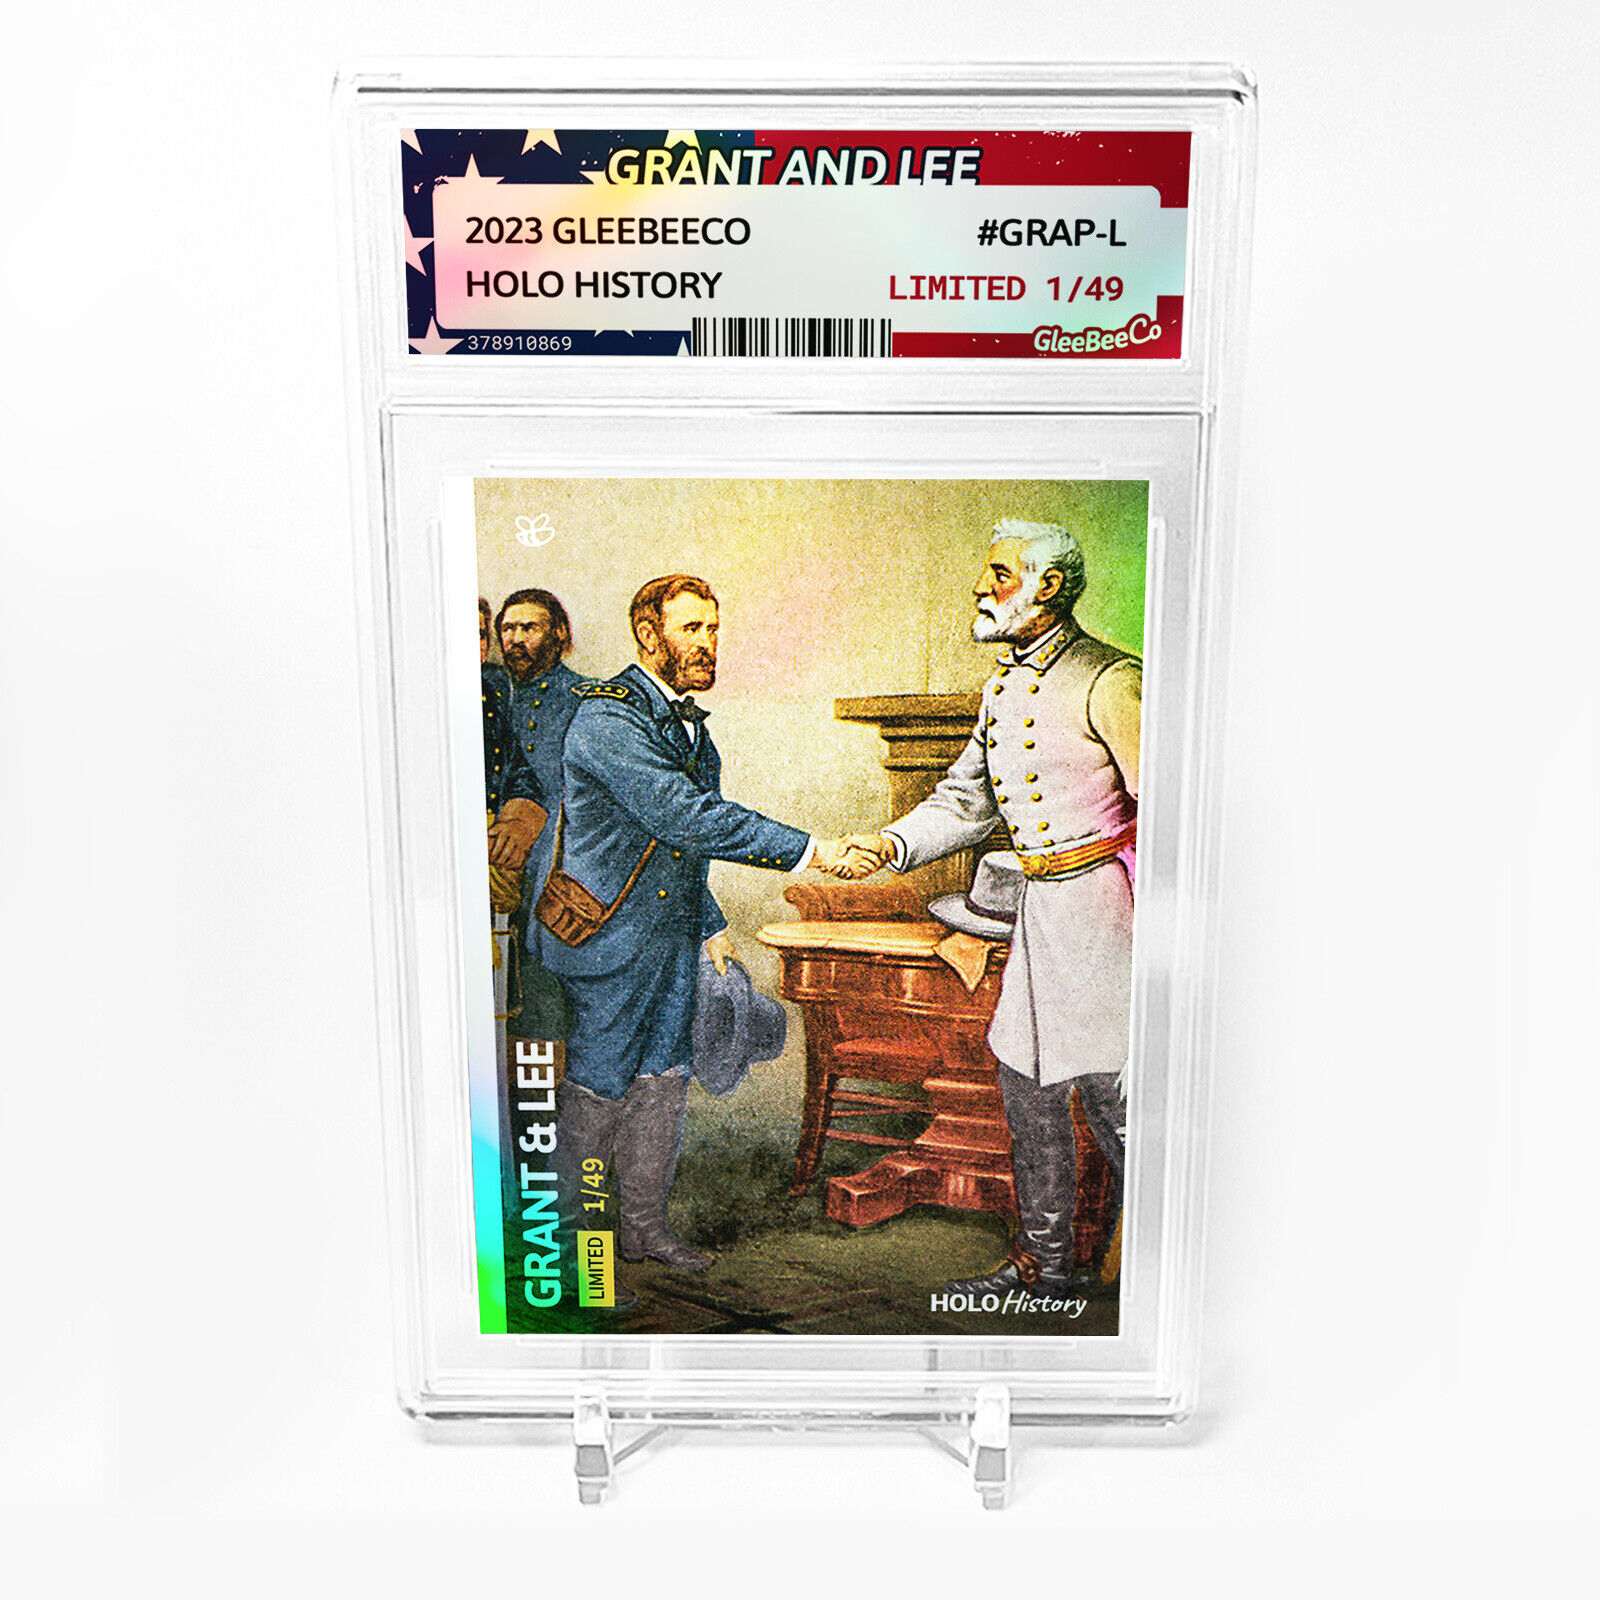 GRANT AND LEE Card 2023 GleeBeeCo Holo History #GRAP-L Limited to Only /49